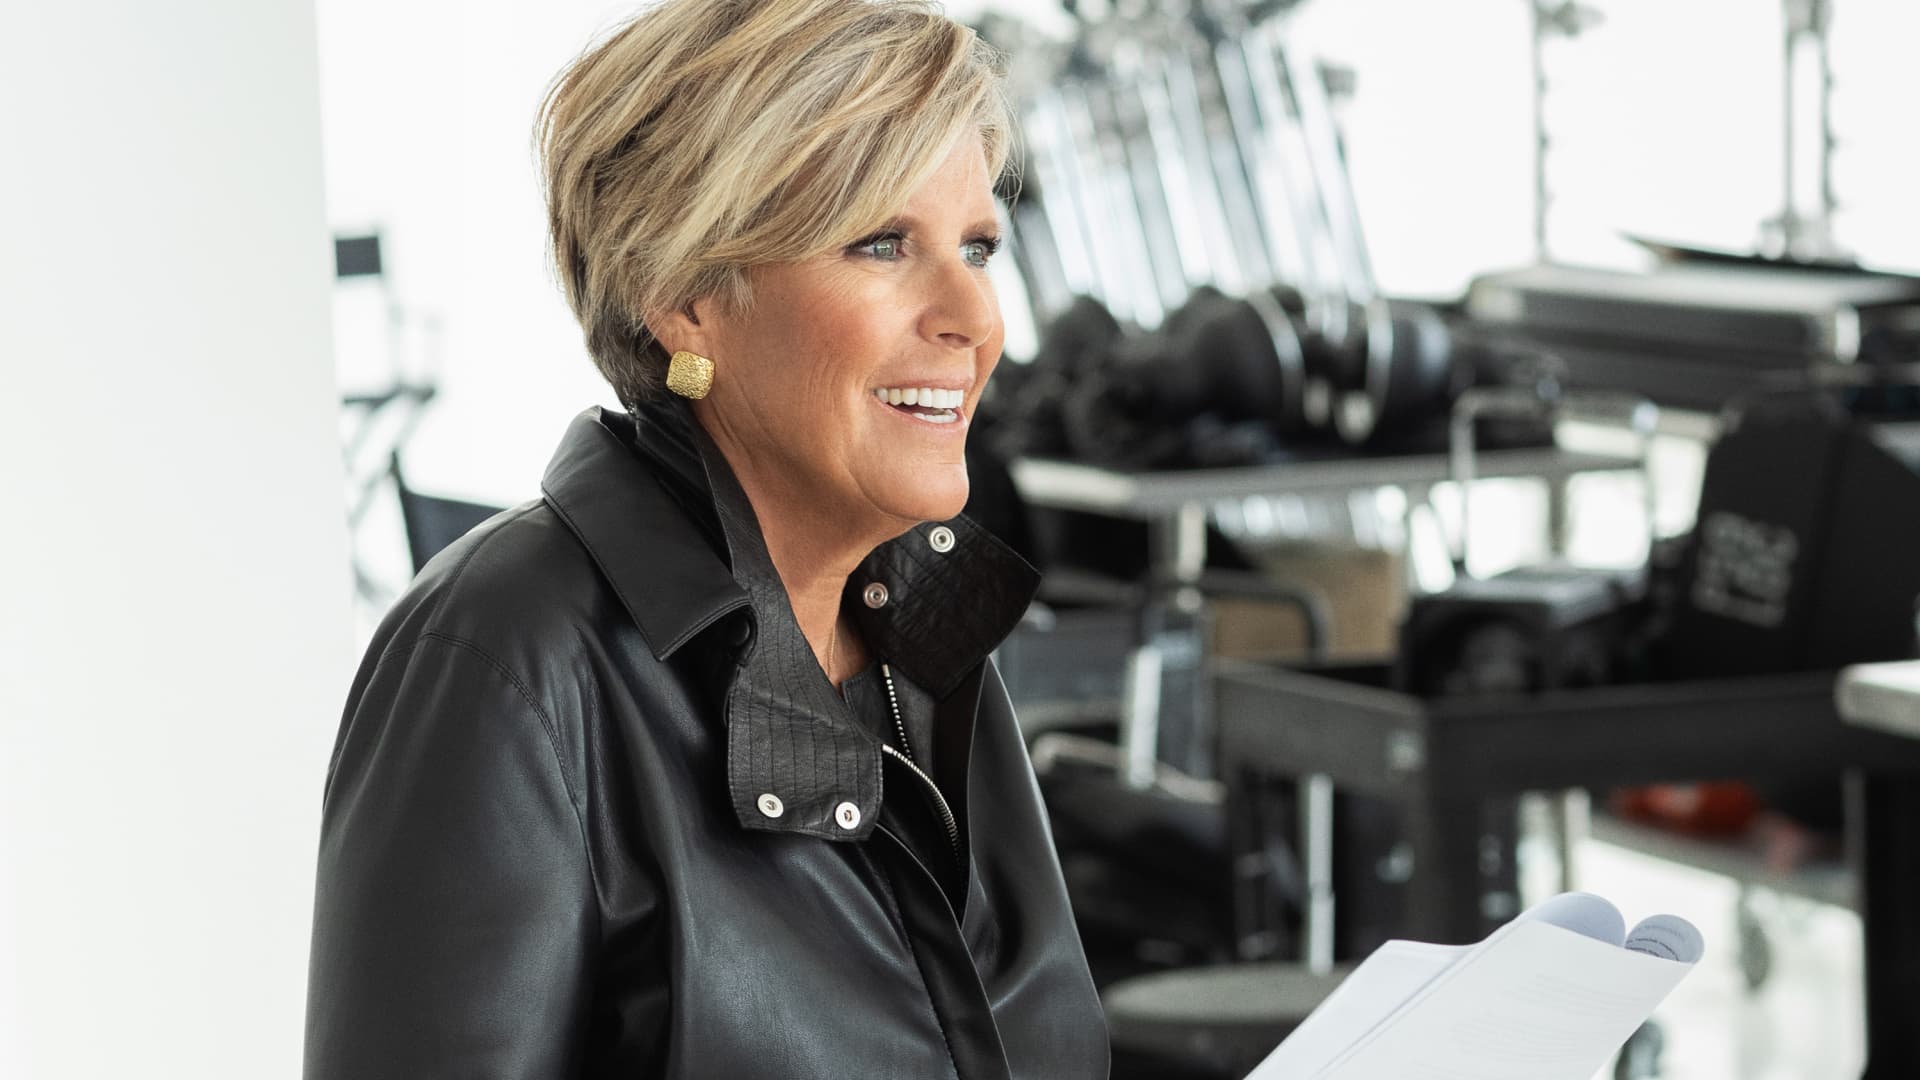 Suze Orman hates whenever you happen to redo your value range every January: ‘Even as you restrict,’ it’s doubtless you’ll perchance perchance sooner or later ‘explode’